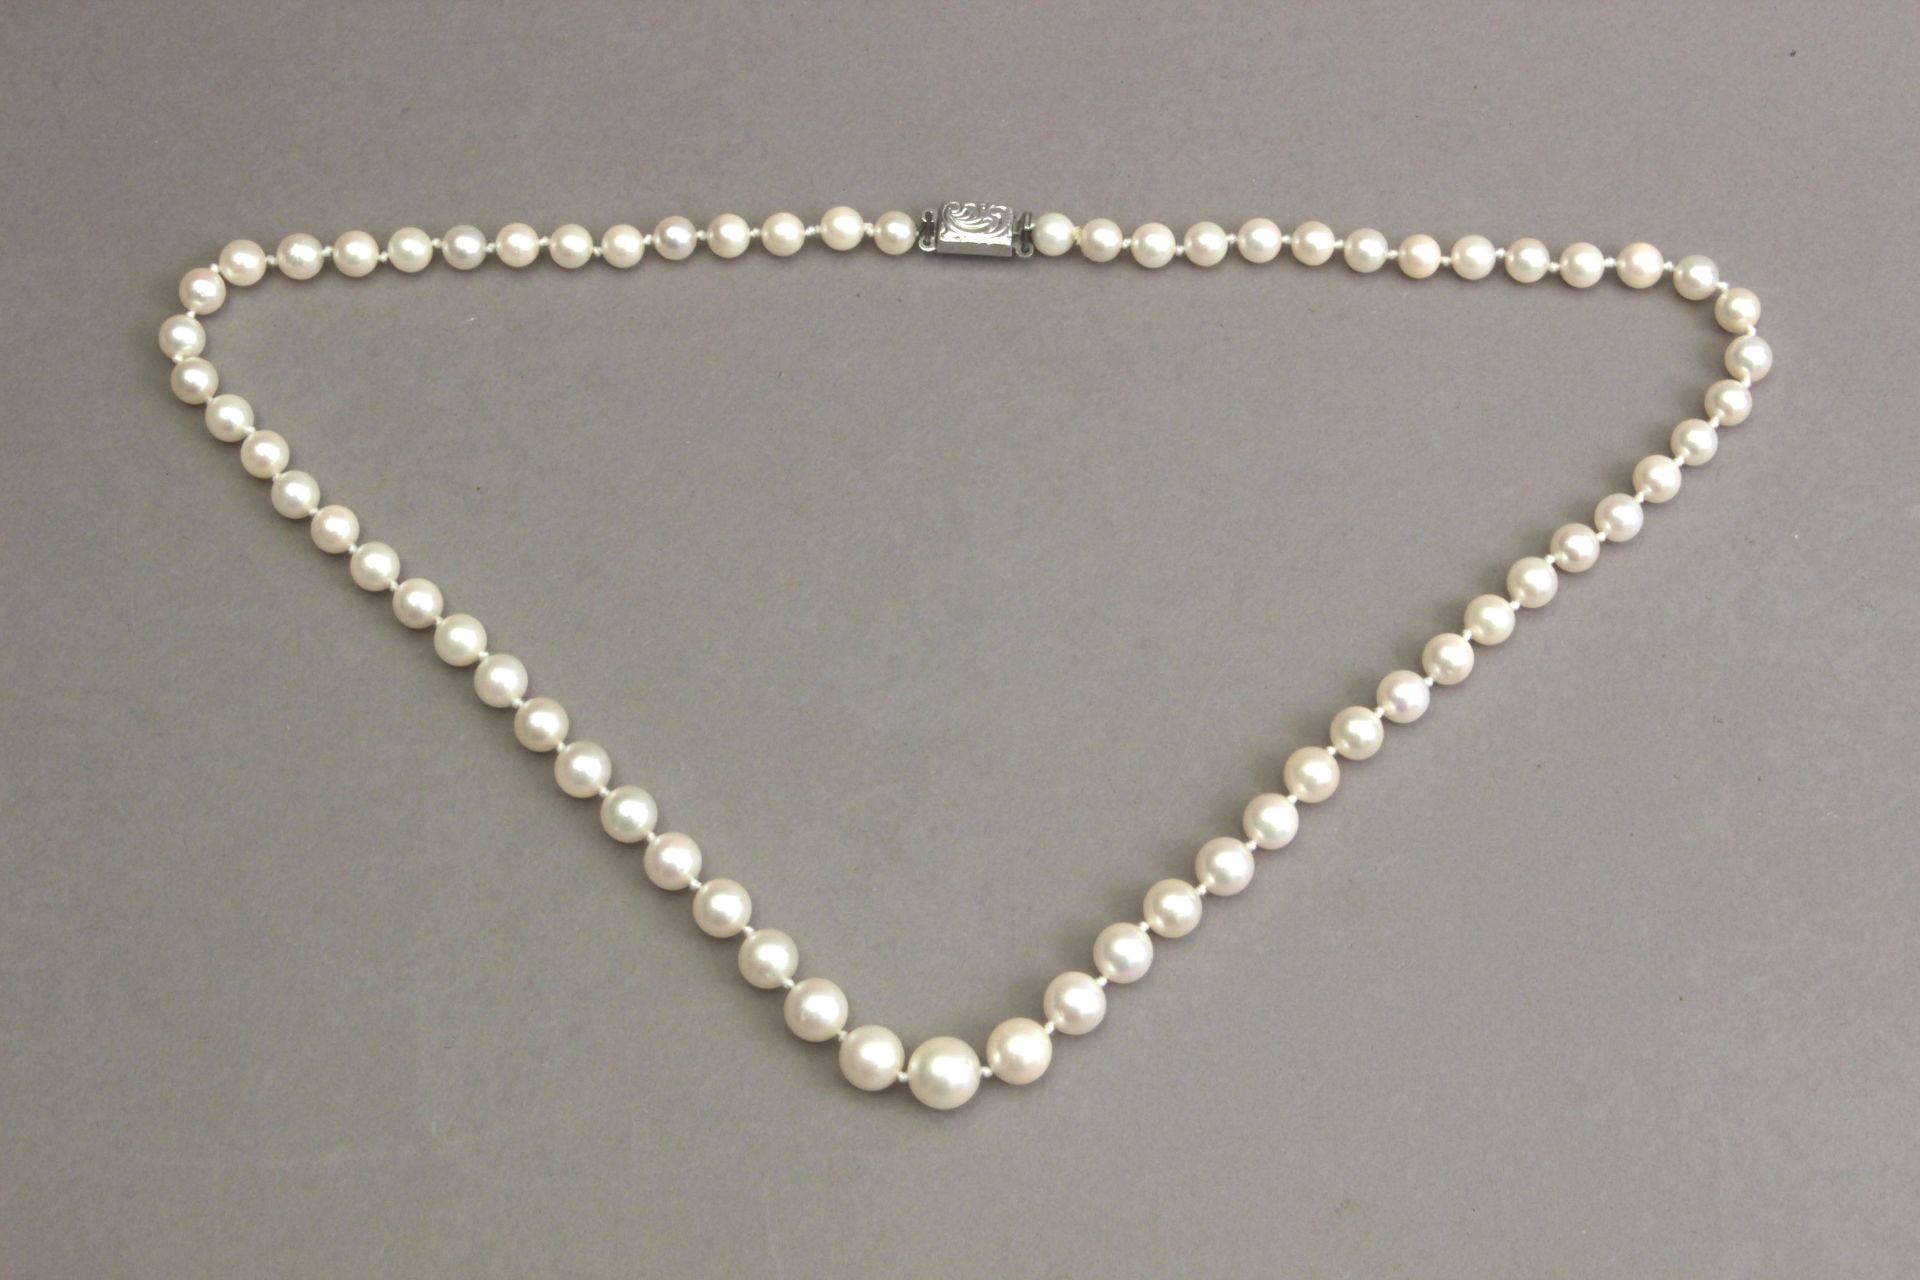 A cultured pearls necklace with a silver clasp